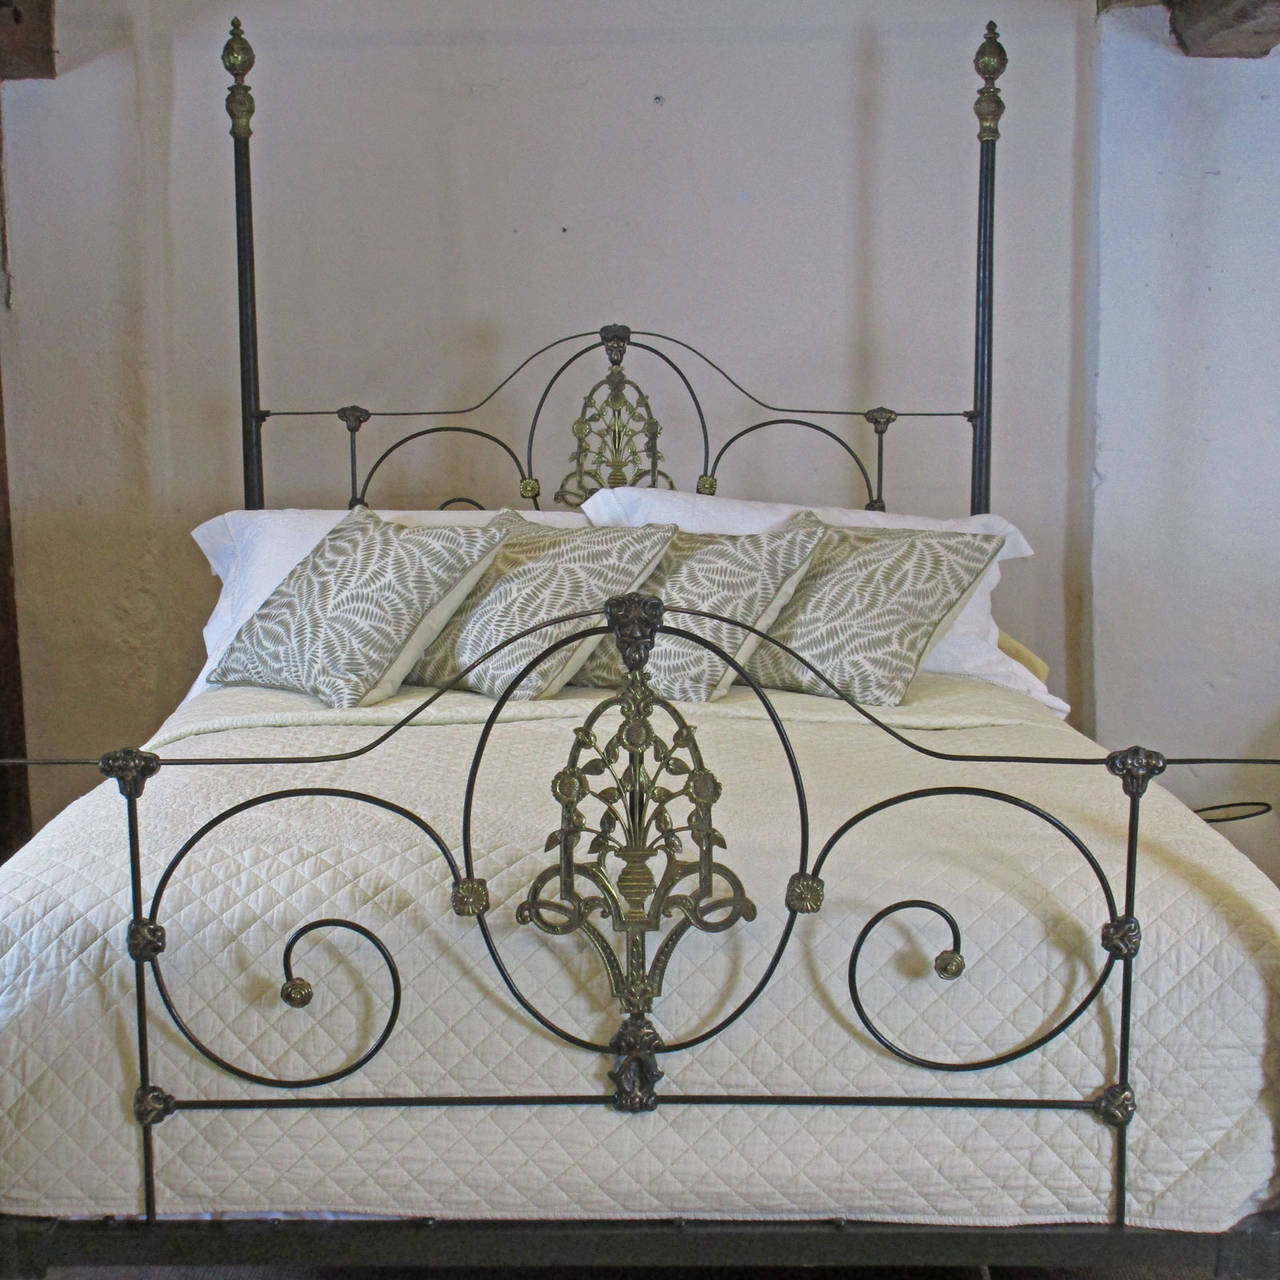 Superb Victorian four poster bed suitable for American Queen Size or British King Size. Circa 1870.
This bed also has an arched canopy .

The price is for the bedstead alone, the base, mattress and bedding are extra and can be provided by Seventh